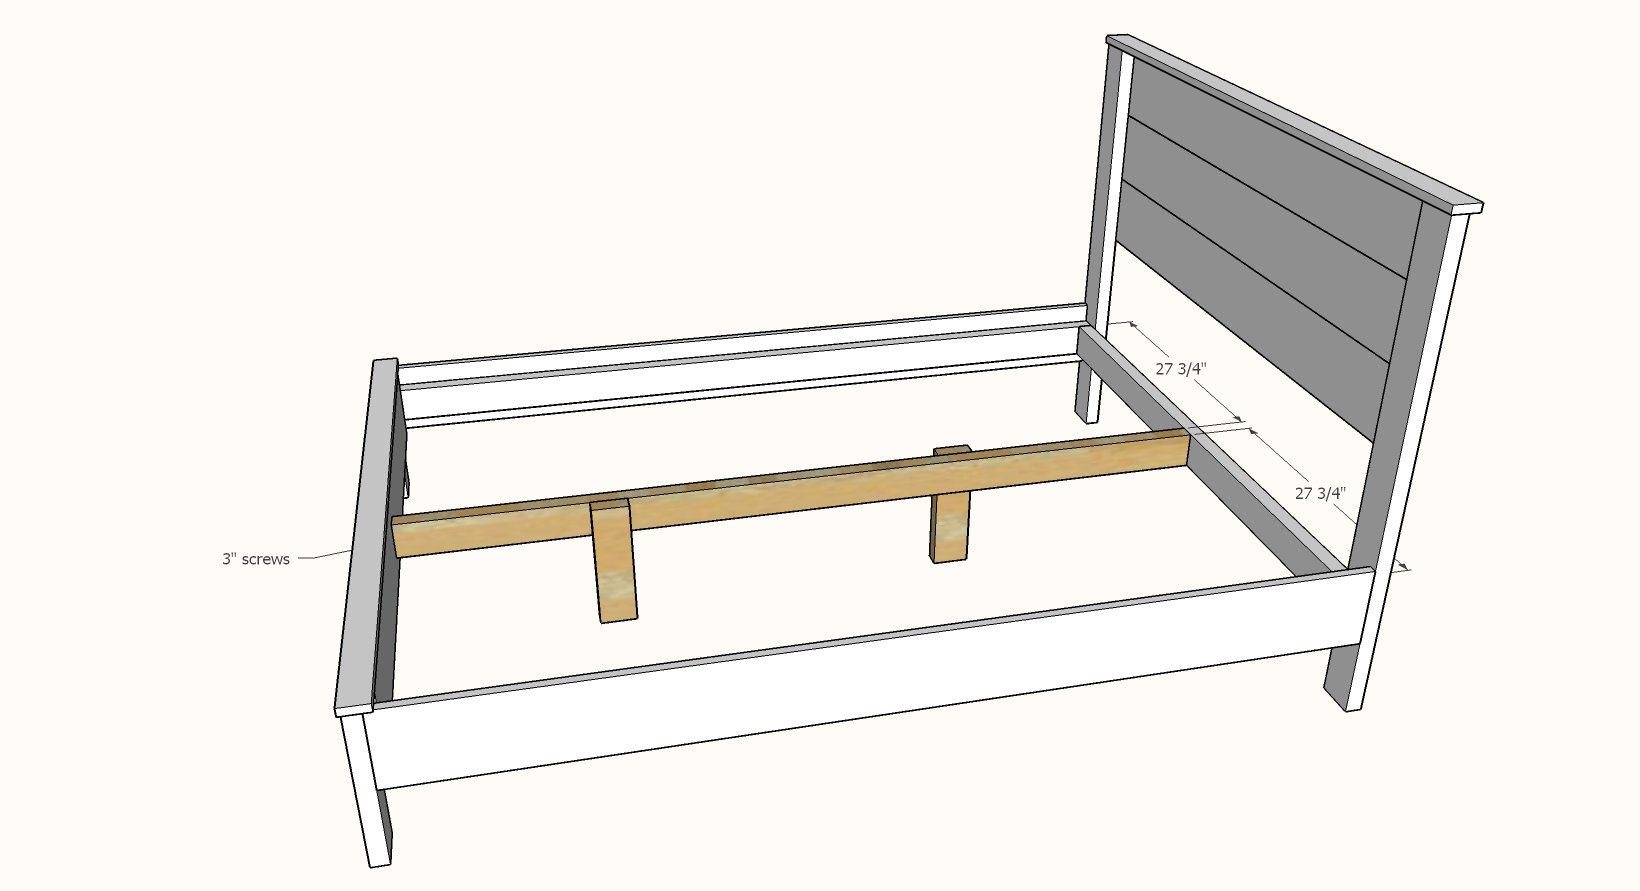 bed frame center support attached to headboard and footboard